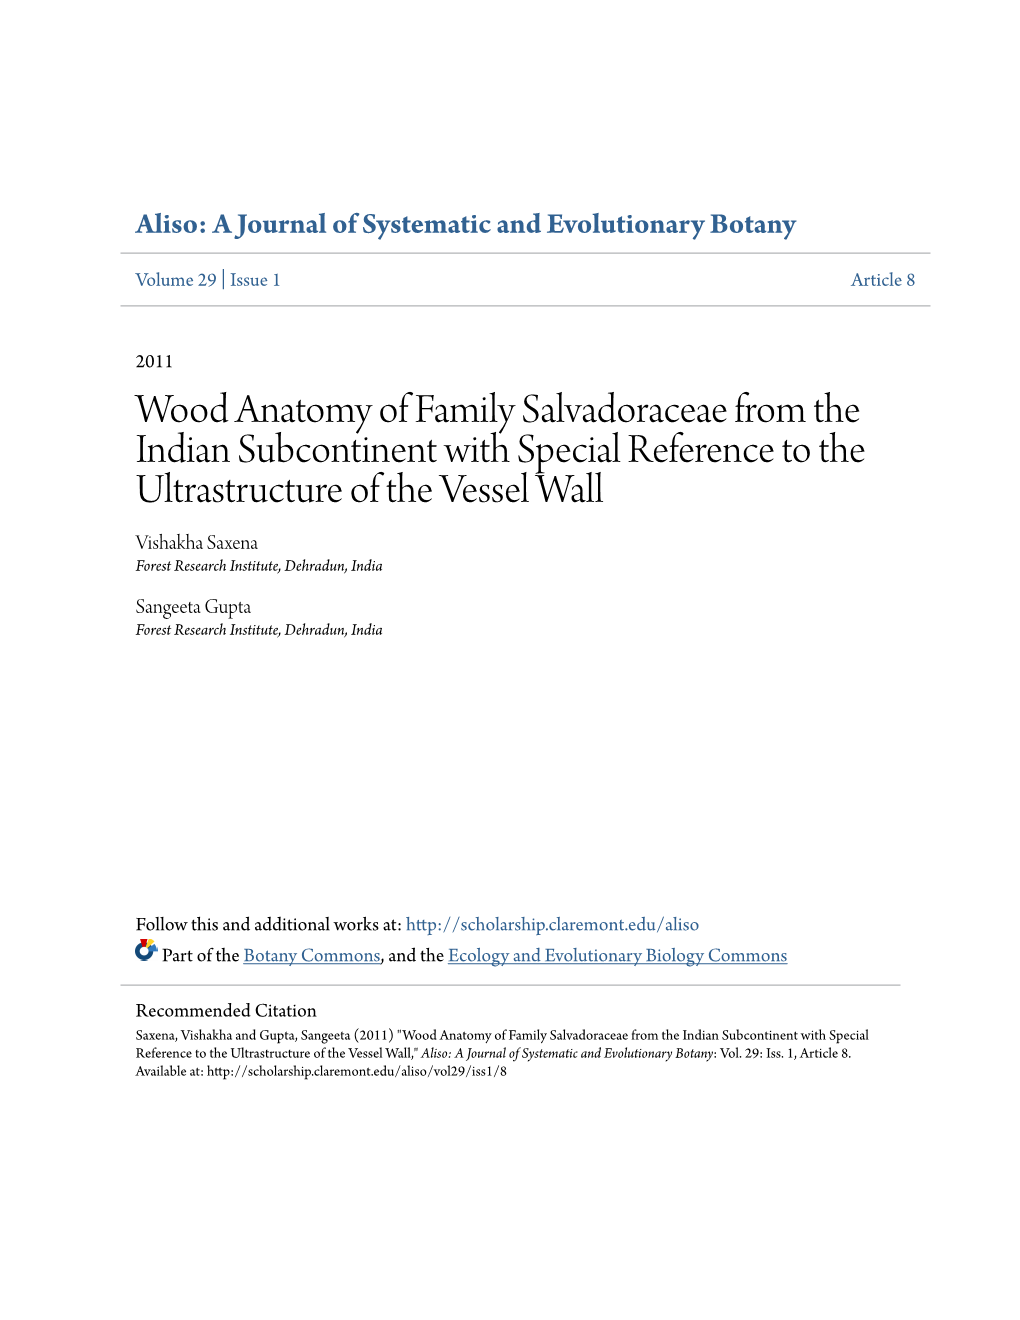 Wood Anatomy of Family Salvadoraceae from the Indian Subcontinent with Special Reference to the Ultrastructure of the Vessel